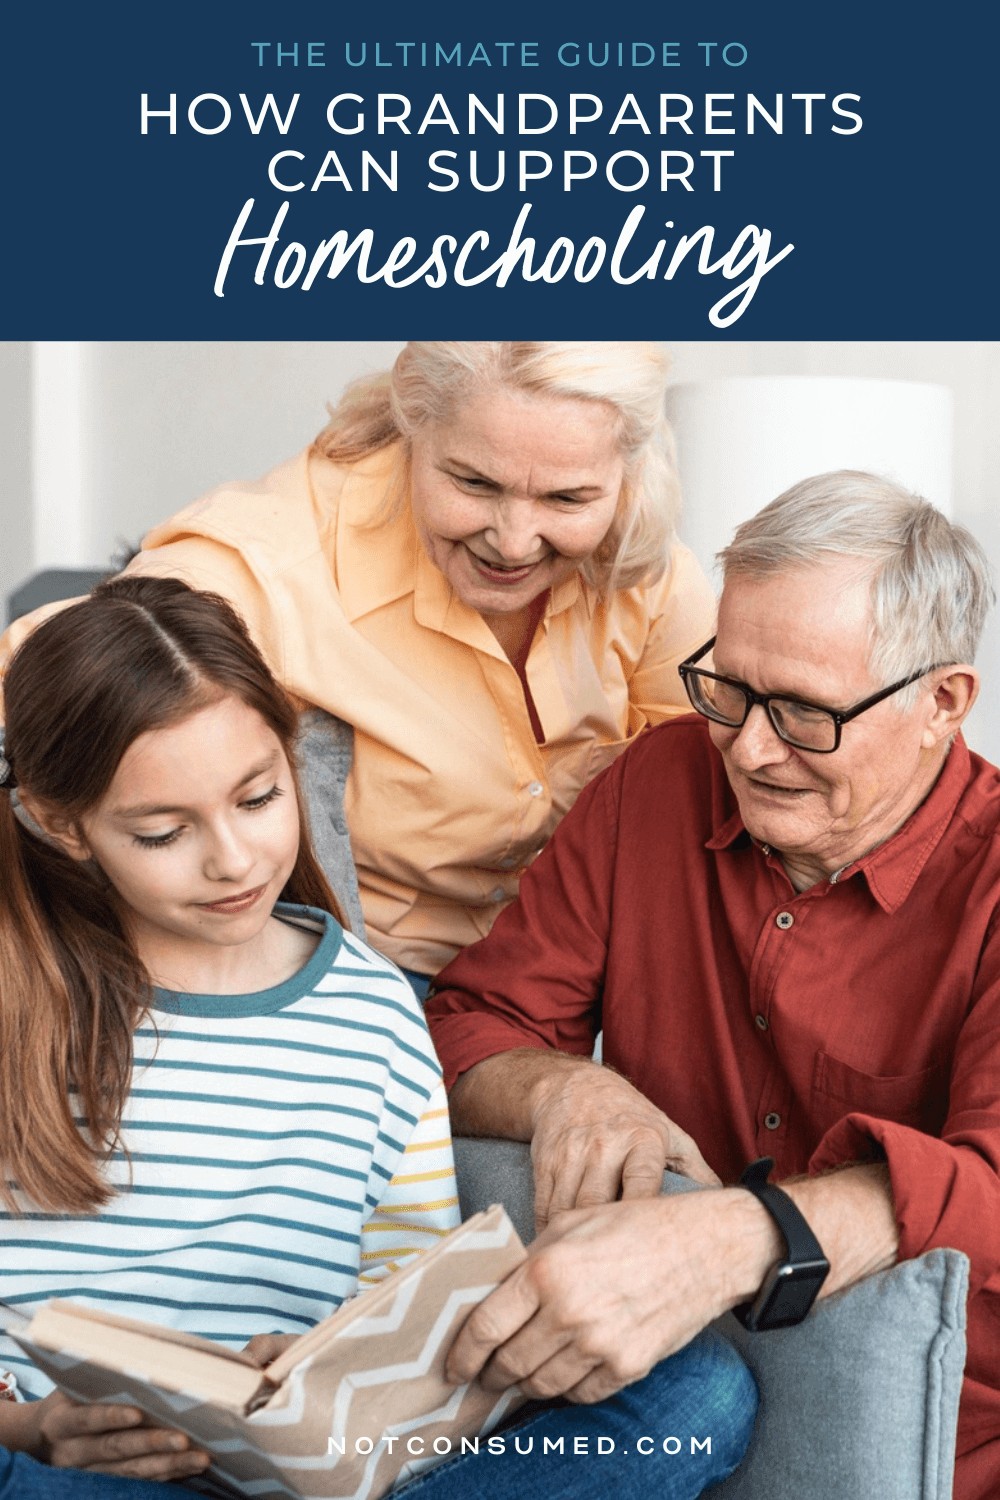 How to Homeschool in Virginia for Free